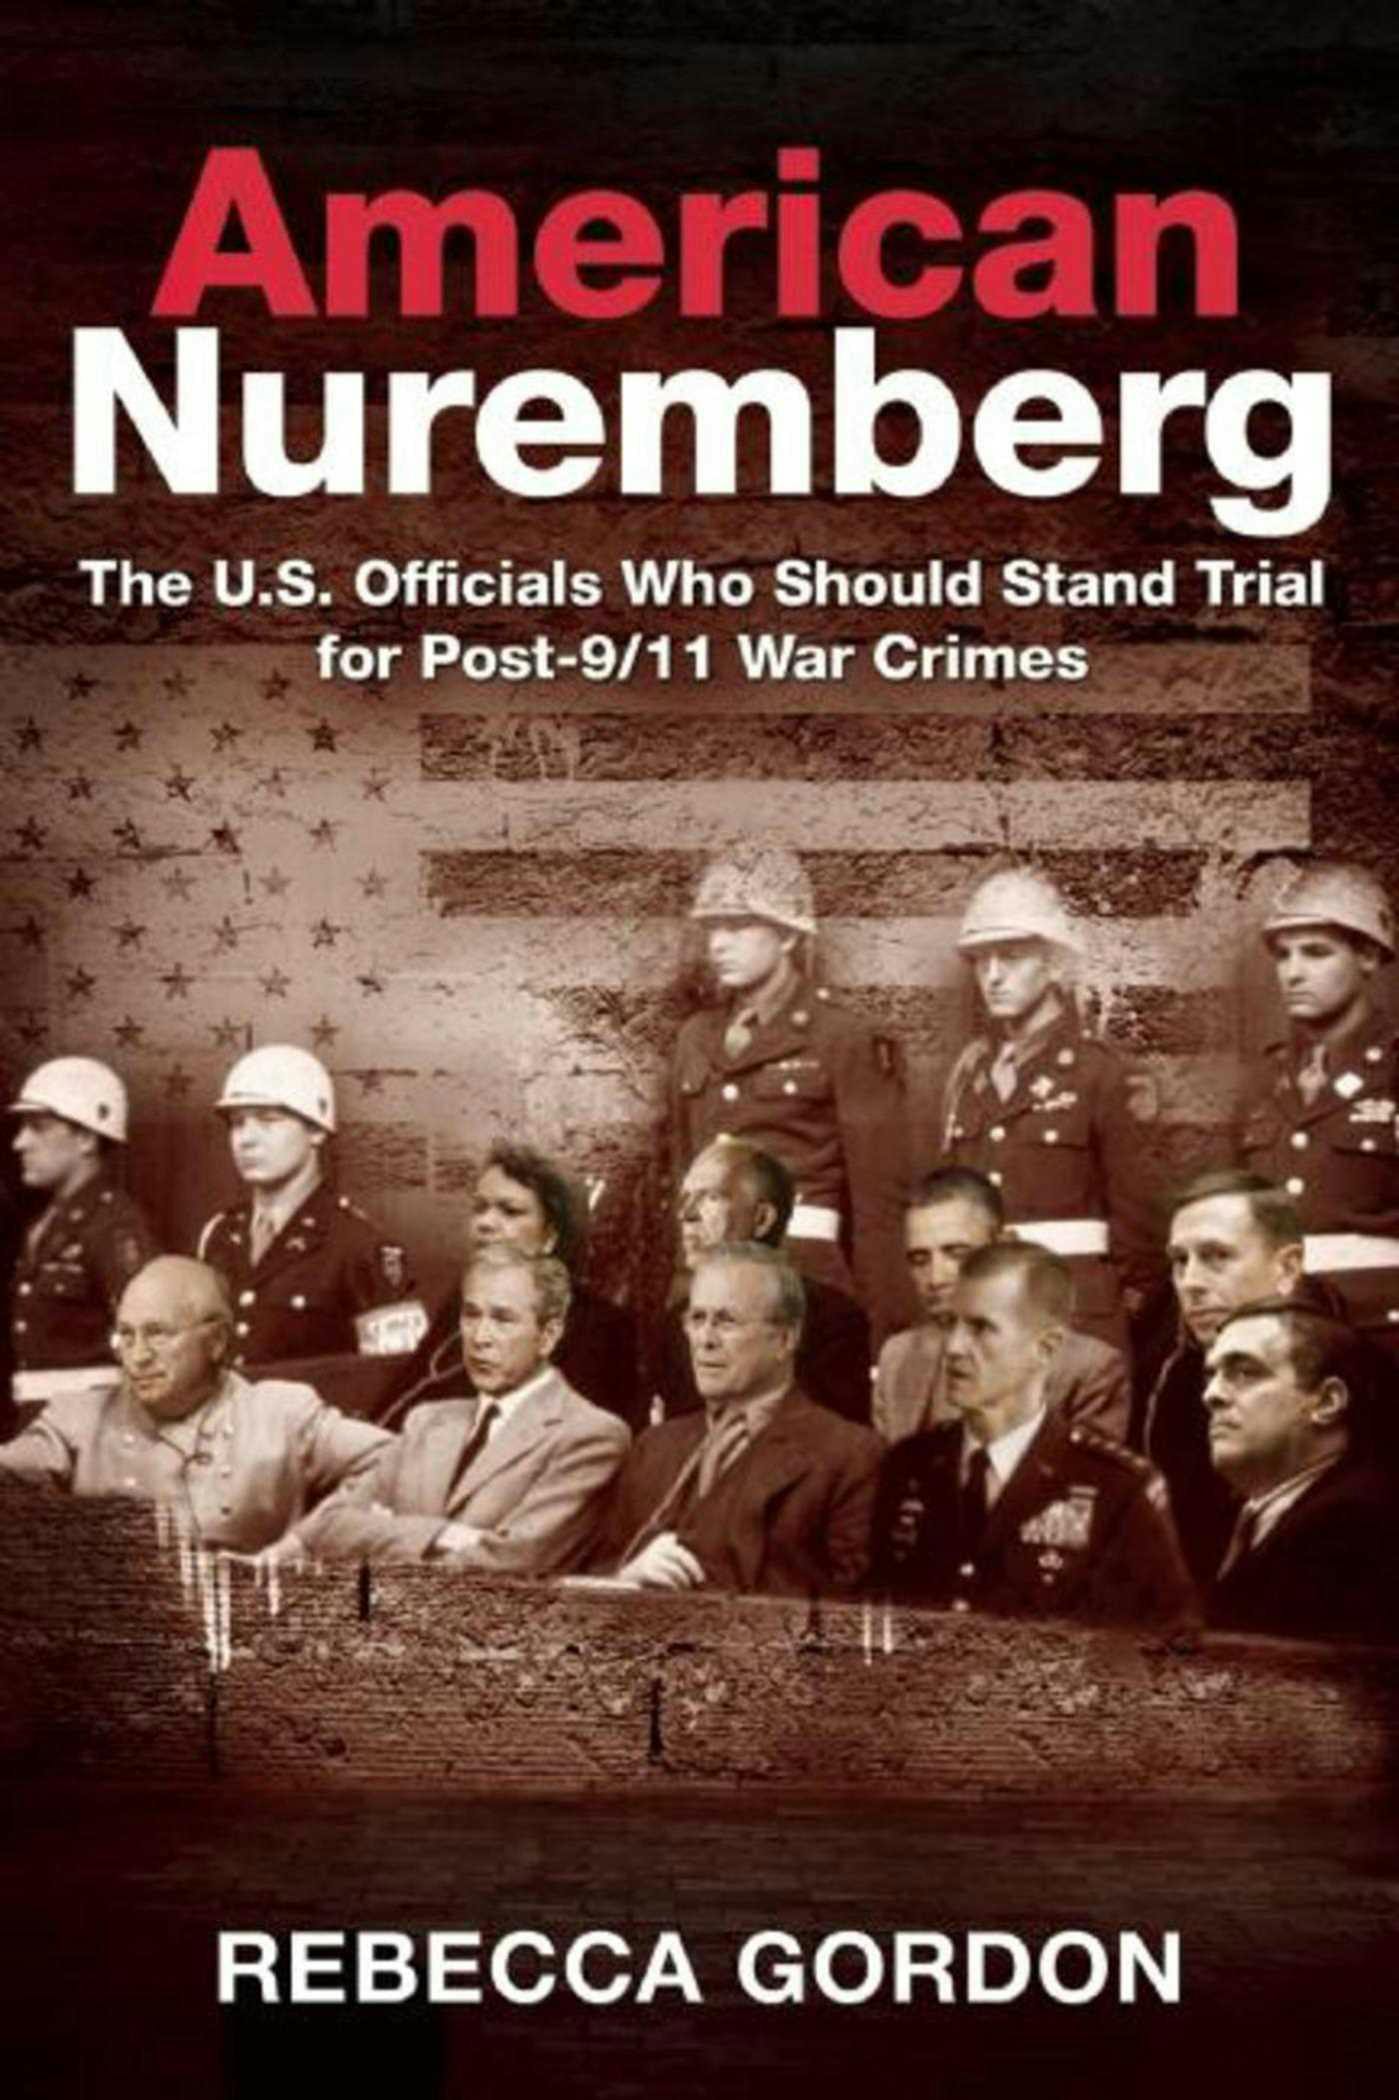 American Nuremberg: The U.S. Officials Who Should Stand Trial for Post-9/11 War Crimes - Rebecca Gordon